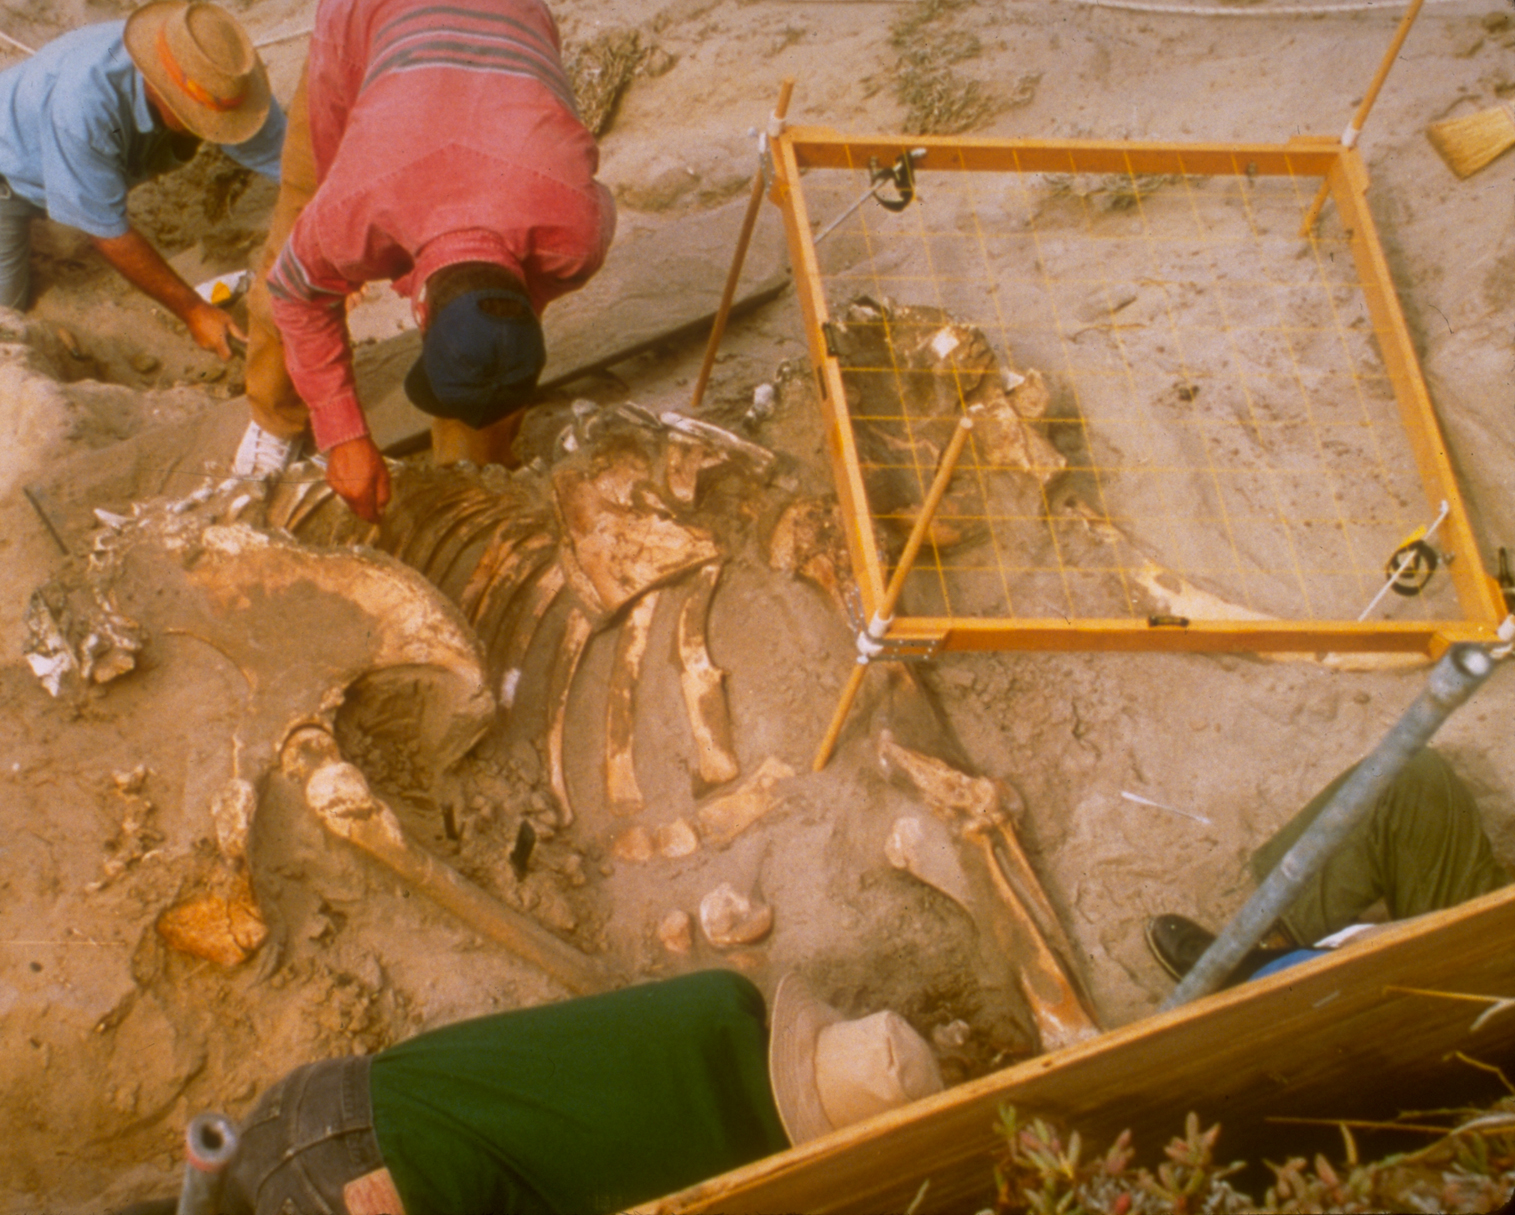 3-4 people work in a wide dirt hole to uncover a small mammoth fossil.